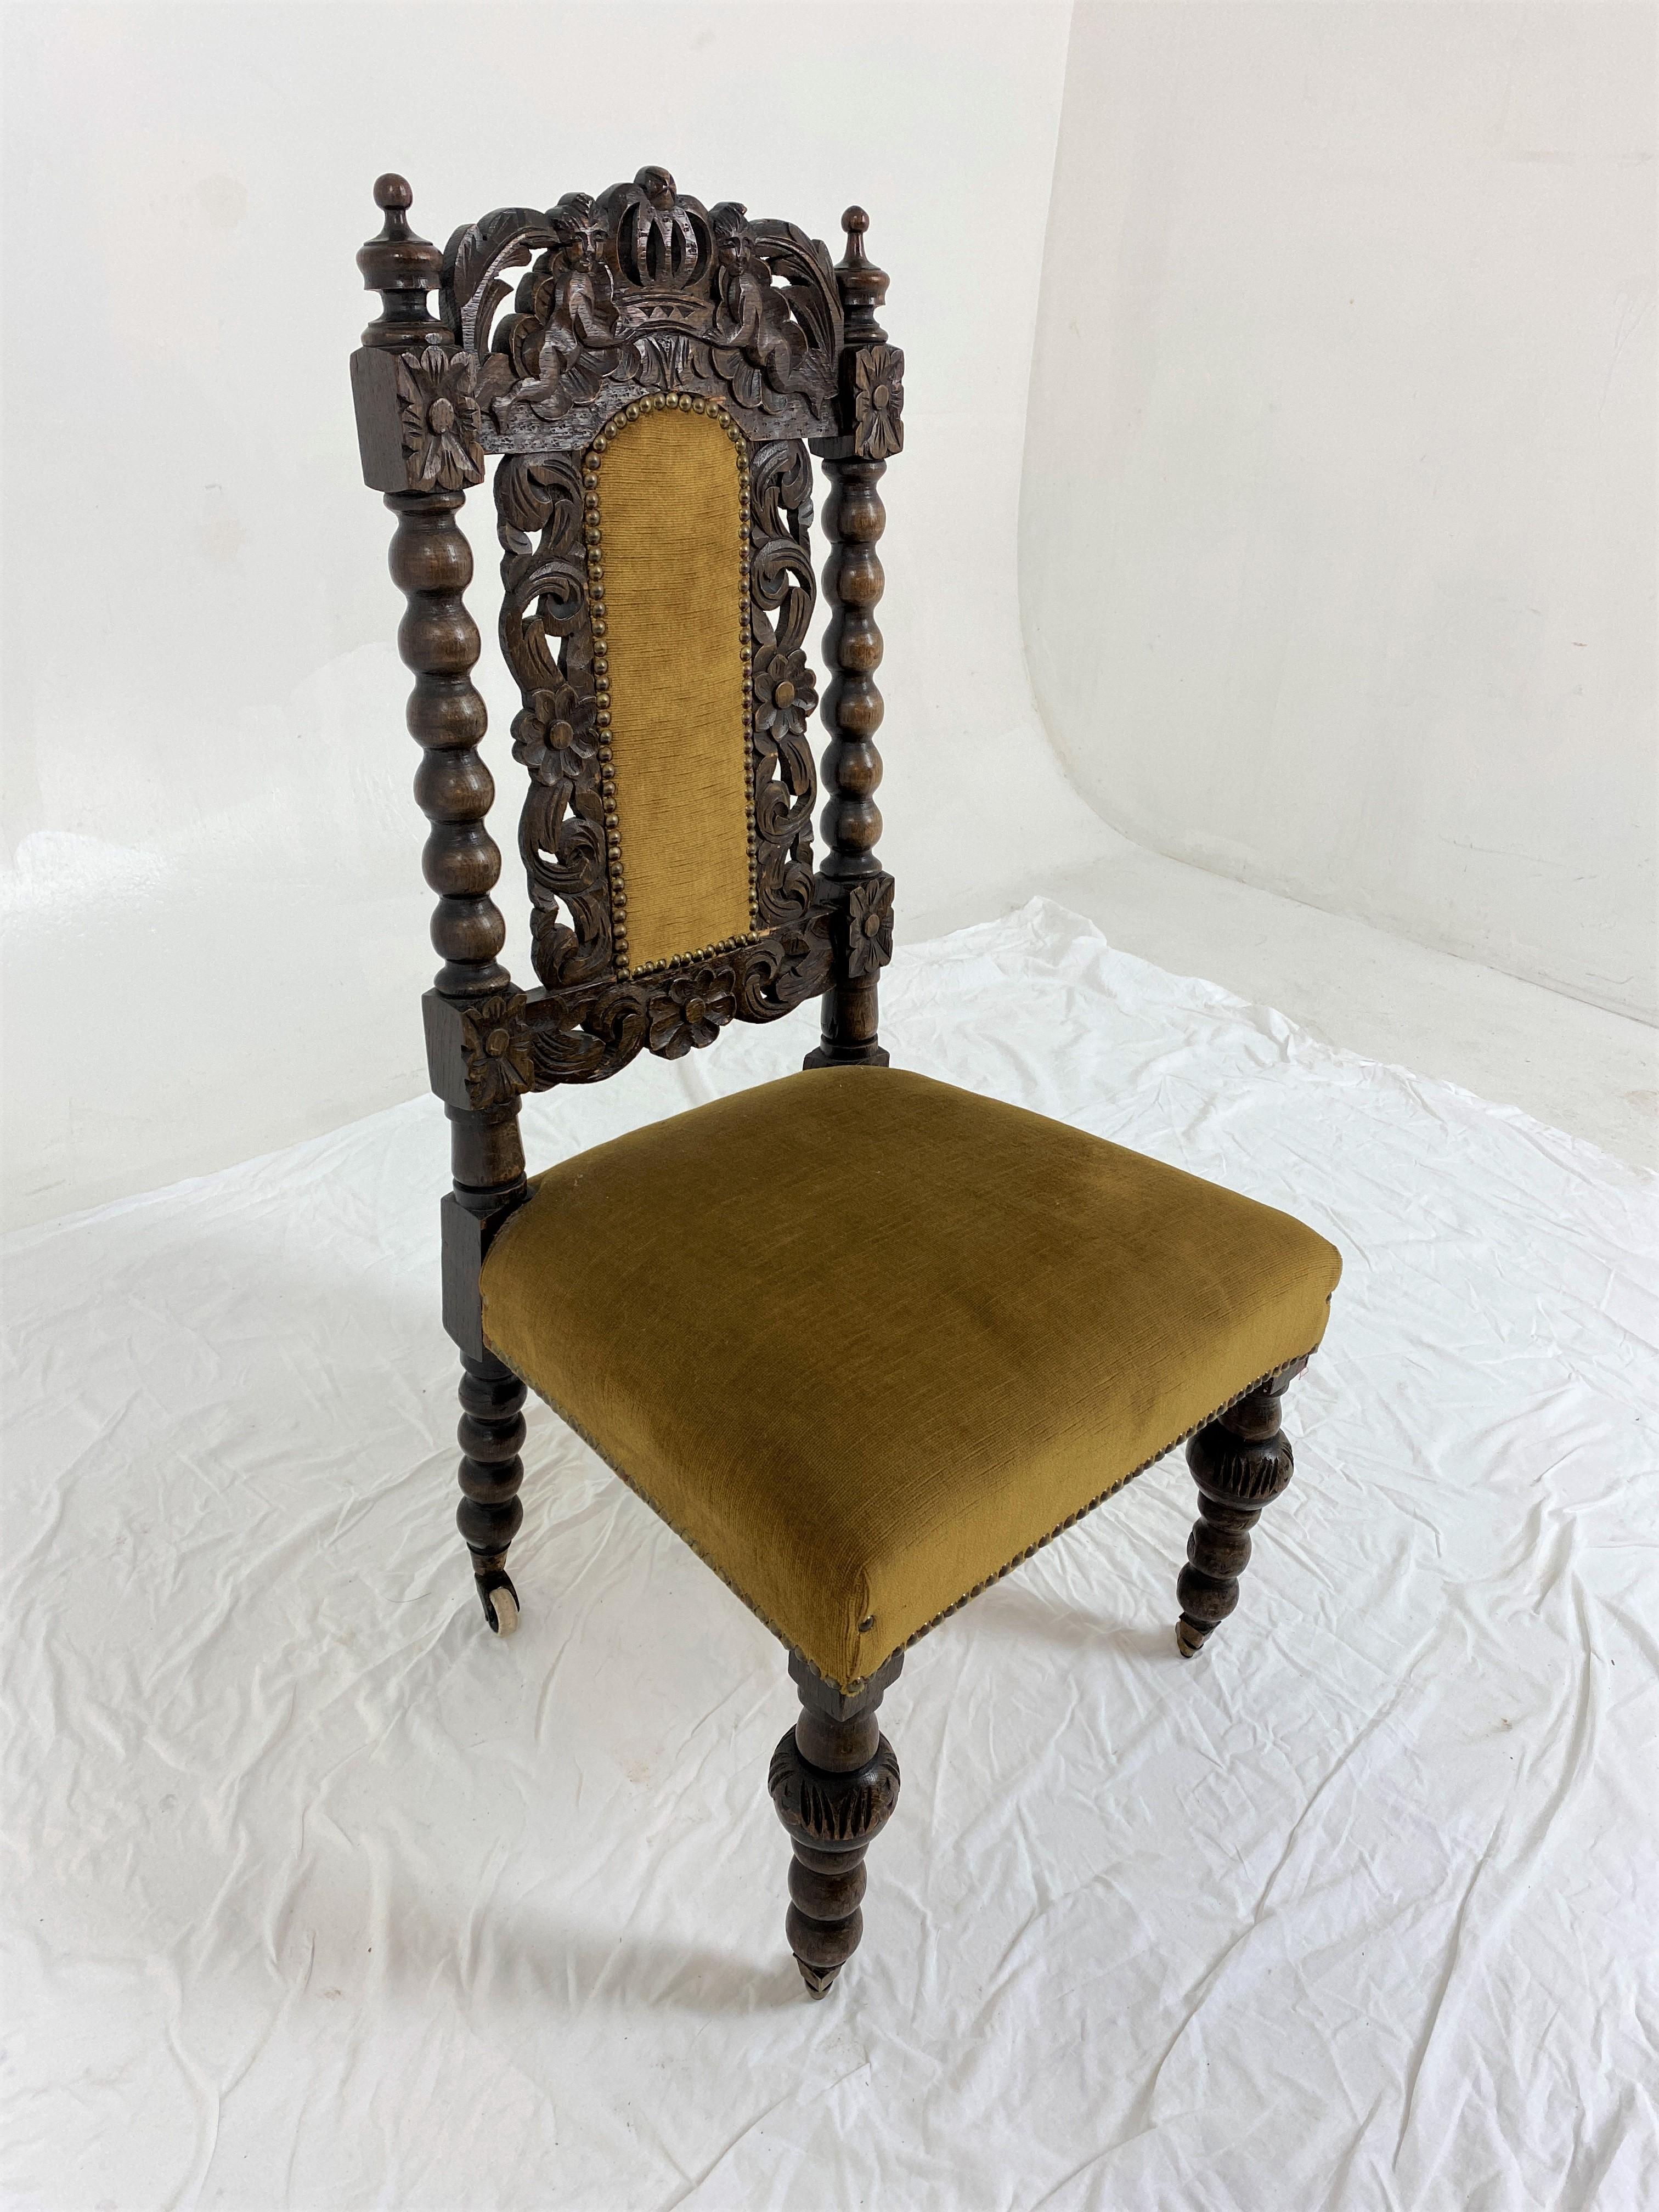 Victorian carved oak Jacobean bobbin upholstered nursing chair, Scotland 1880, H859.

Scotland 1880
Solid Oak
Original Finish pierced top rail
Bobbin supports with finials
Upholstered back and seat
Standing on bulbous carod front legs
With